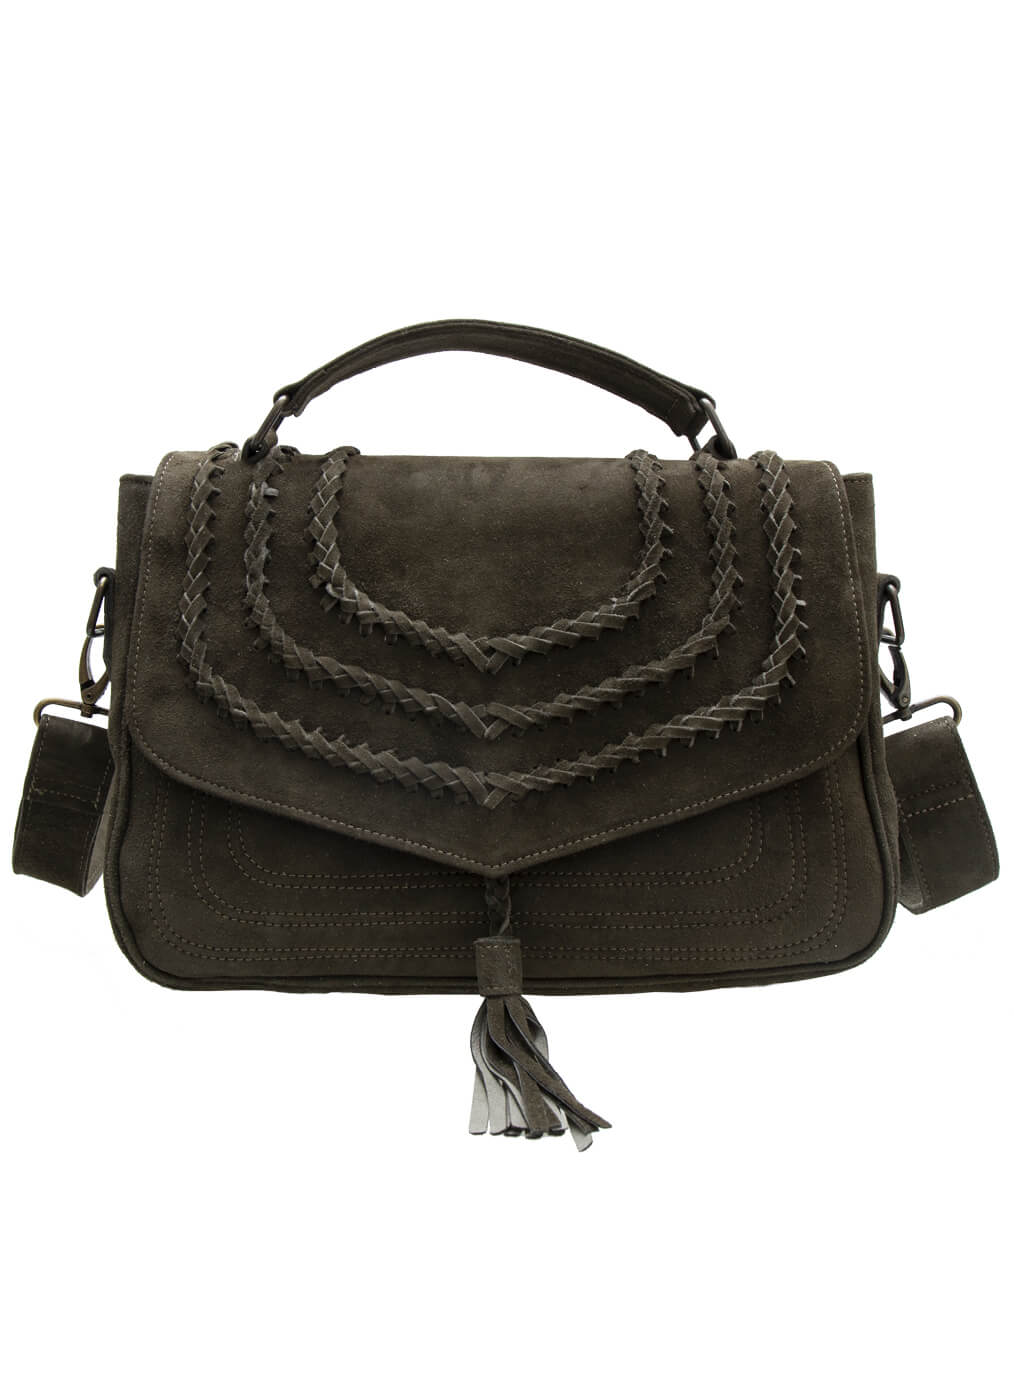 Goat Leather Bag “Just About you”, urban green